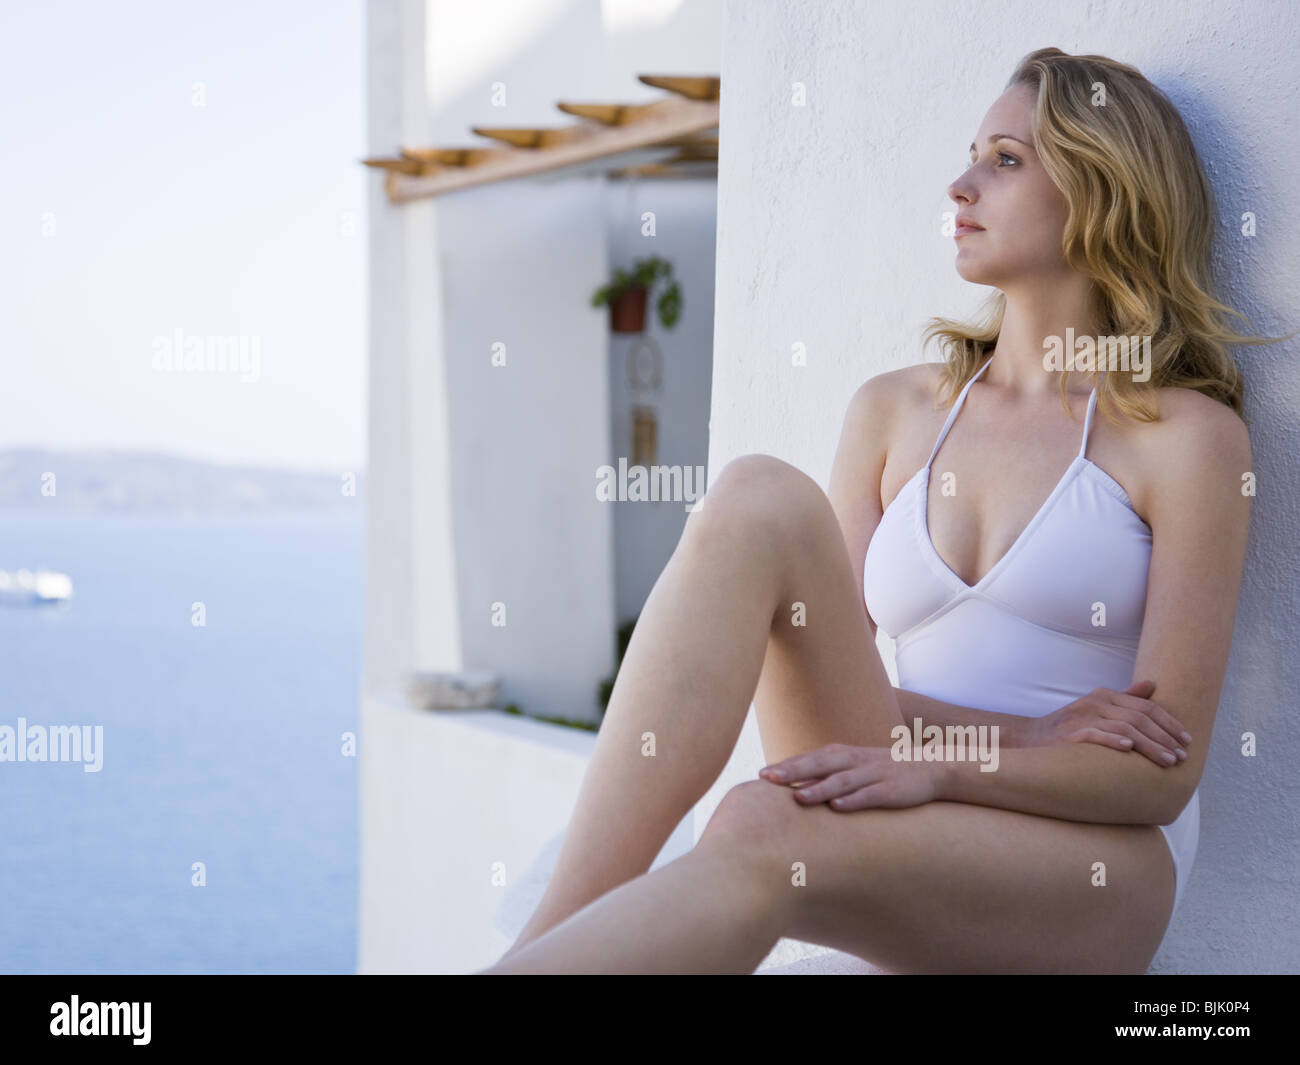 Woman in swimsuit sitting and leaning on wall outdoors smiling Stock Photo